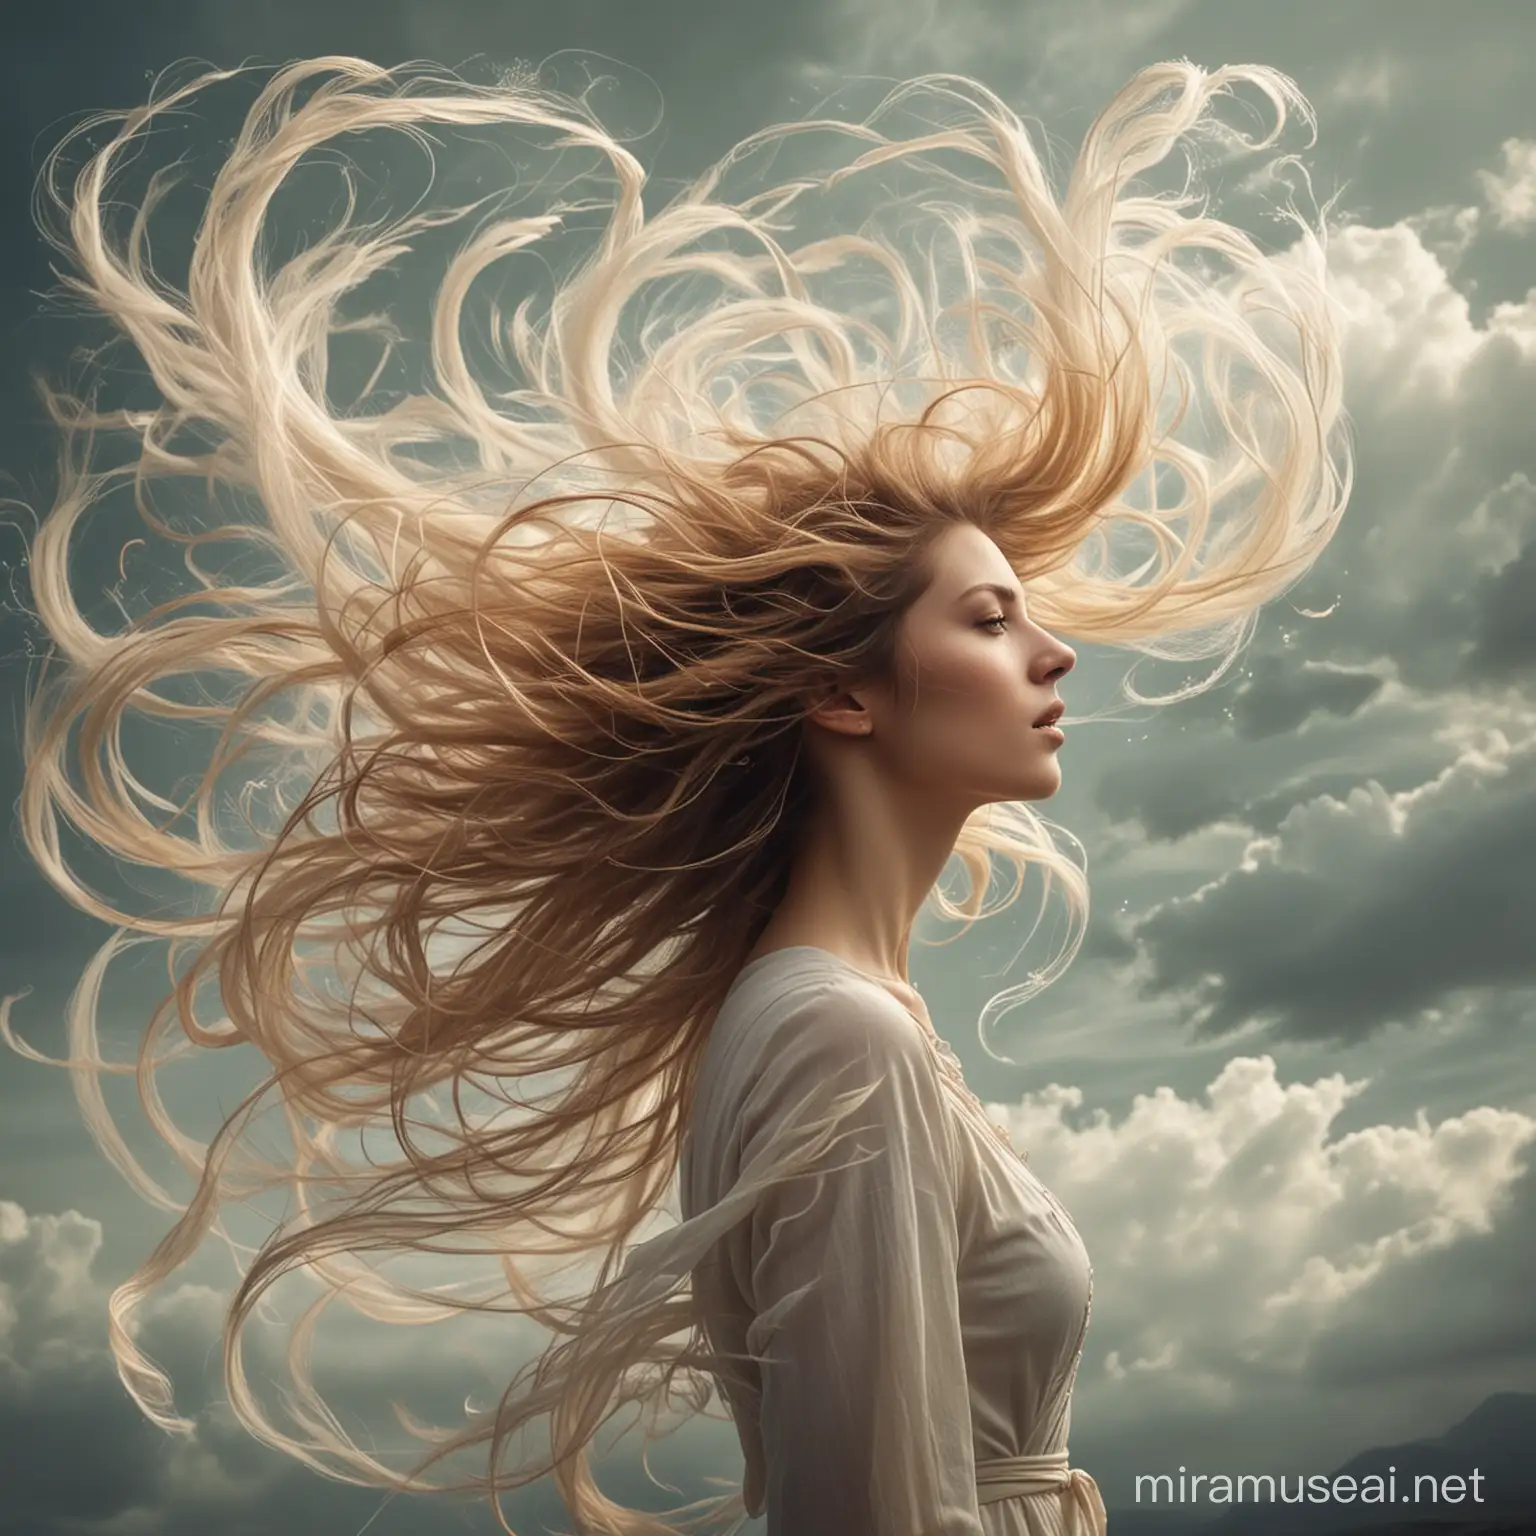 Whispers of wind carrying secrets through the air, depicted as wispy tendrils.